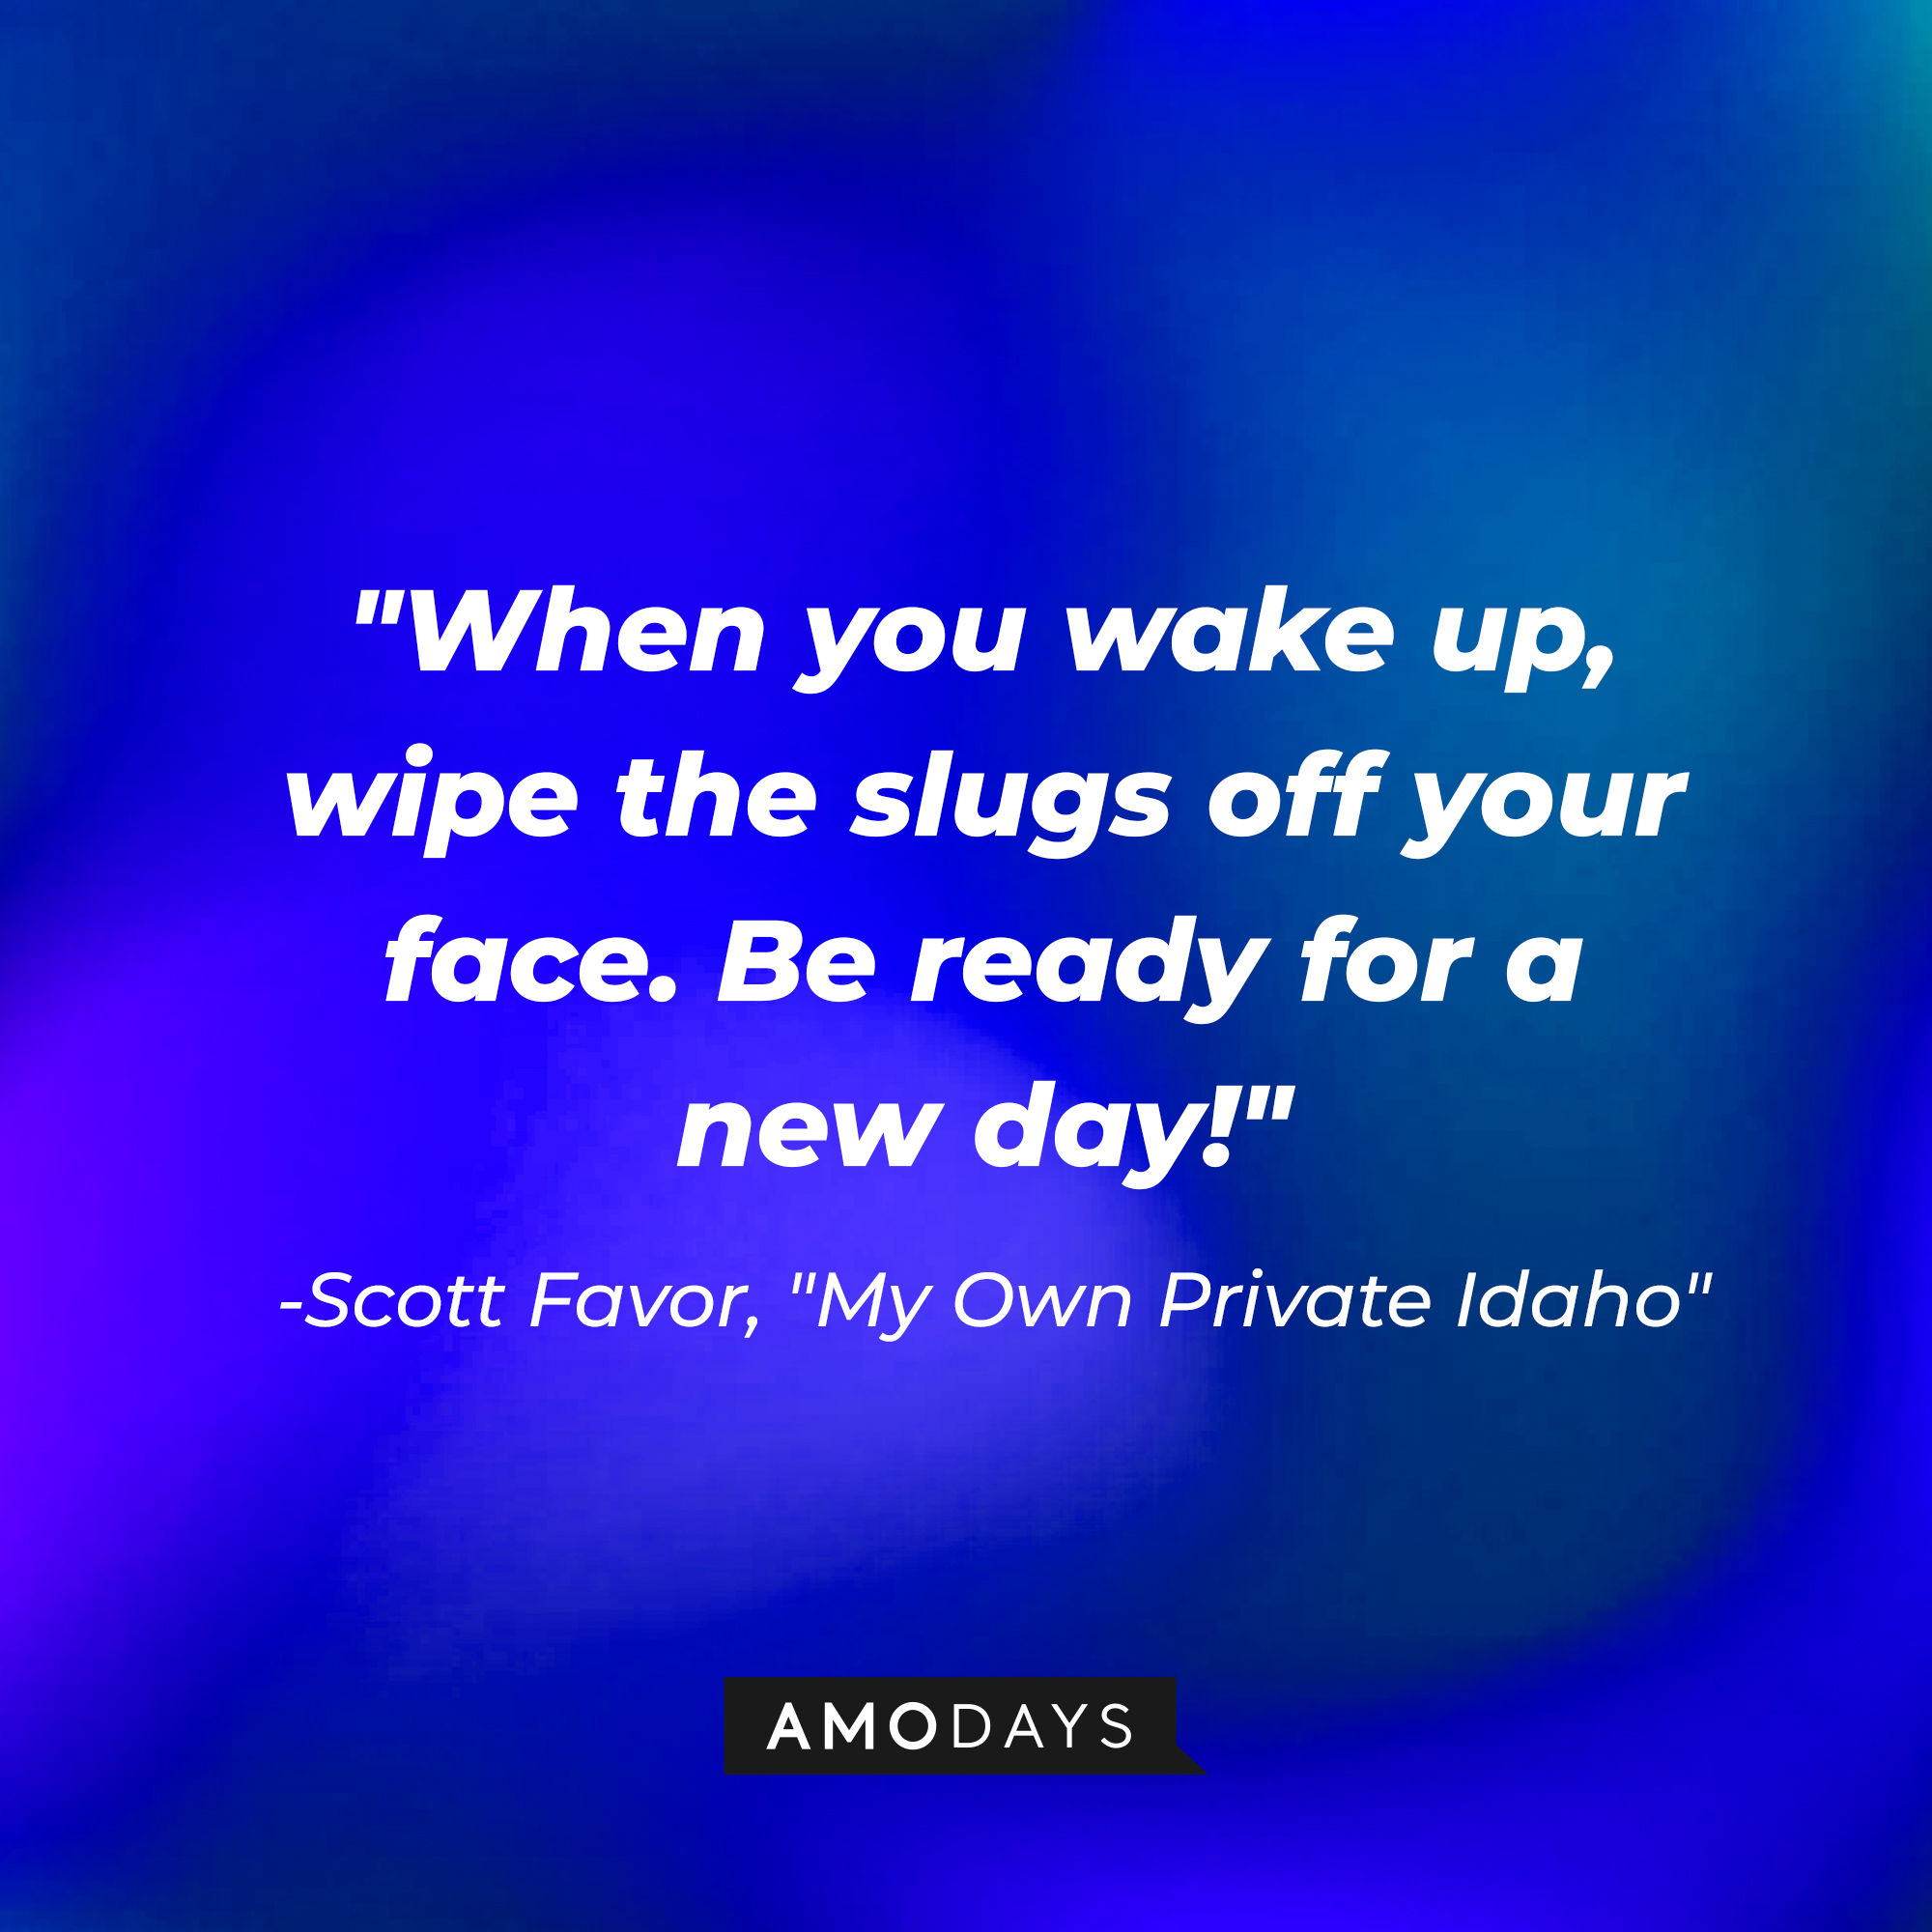 Scott Favor's quote: "When you wake up, wipe the slugs off your face. Be ready for a new day!" | Source: AmoDays